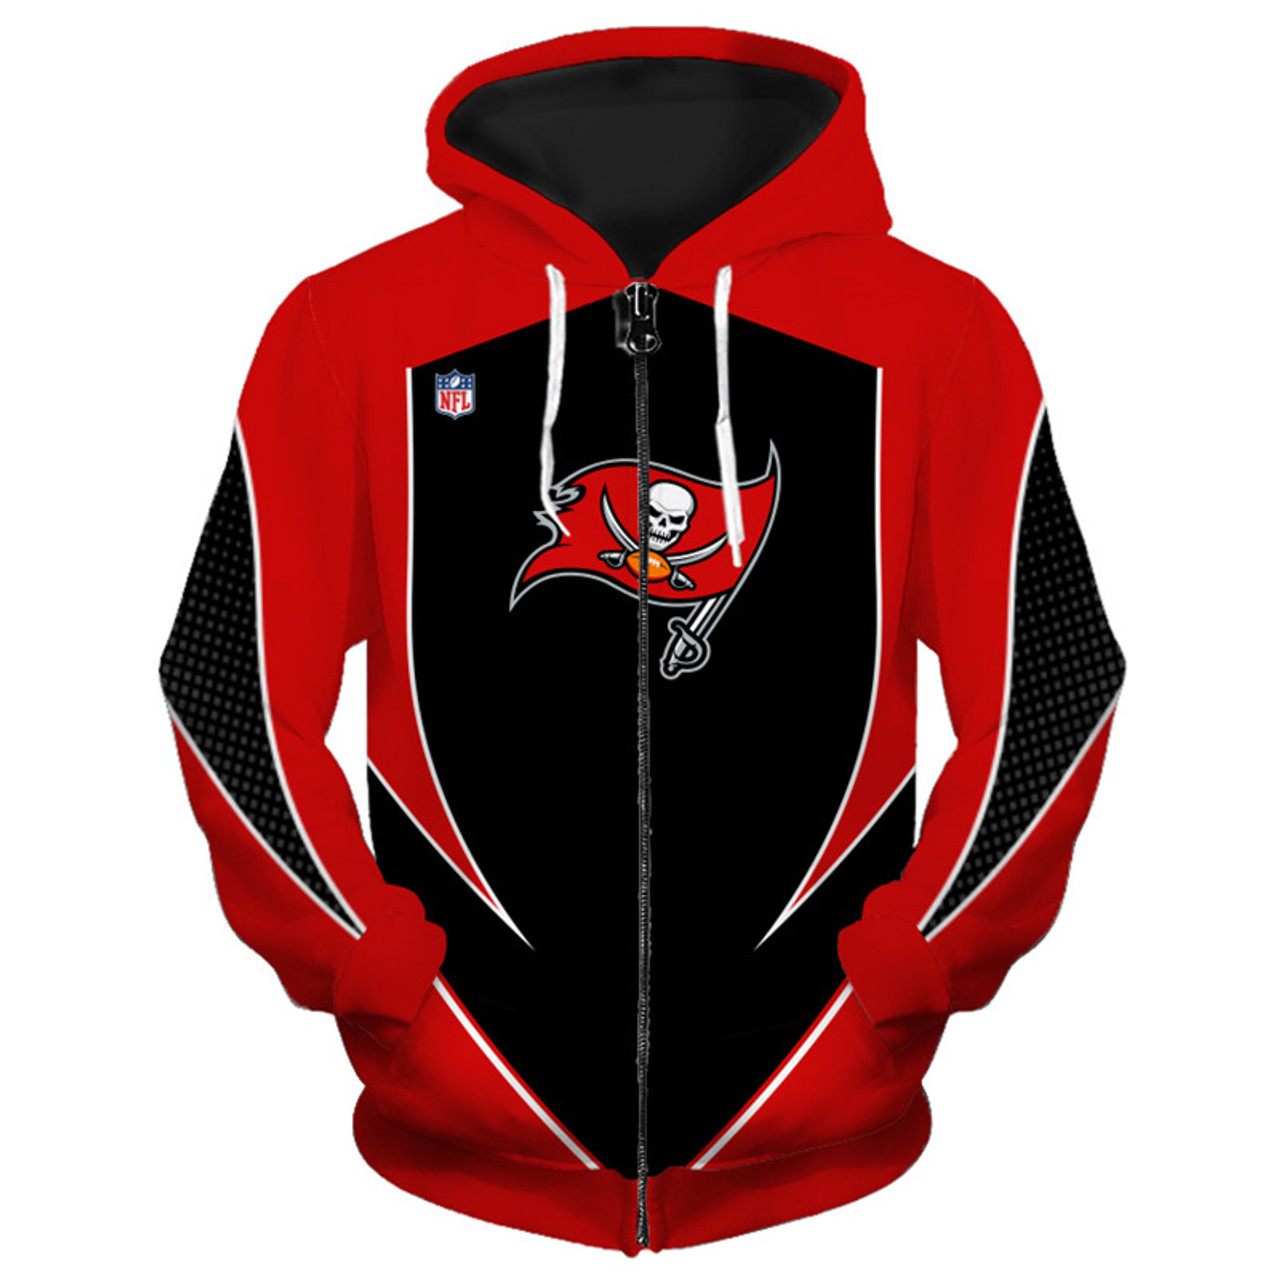 **(OFFICIAL-N.F.L.TAMPA-BAY-BUCCANEERS-TEAM-ZIPPERED-HOODIES/NEW-CUSTOM-3D-GRAPHIC-PRINTED-DOUBLE-SIDED-DESIGNED/ALL-OVER-OFFICIAL-BUCCANEERS-LOGOS & IN-BUCCANEERS-TEAM-COLORS/WARM-PREMIUM-OFFICIAL-N.F.L.BUCCANEERS-TEAM/ZIPPERED-POCKET-HOODIES)** 